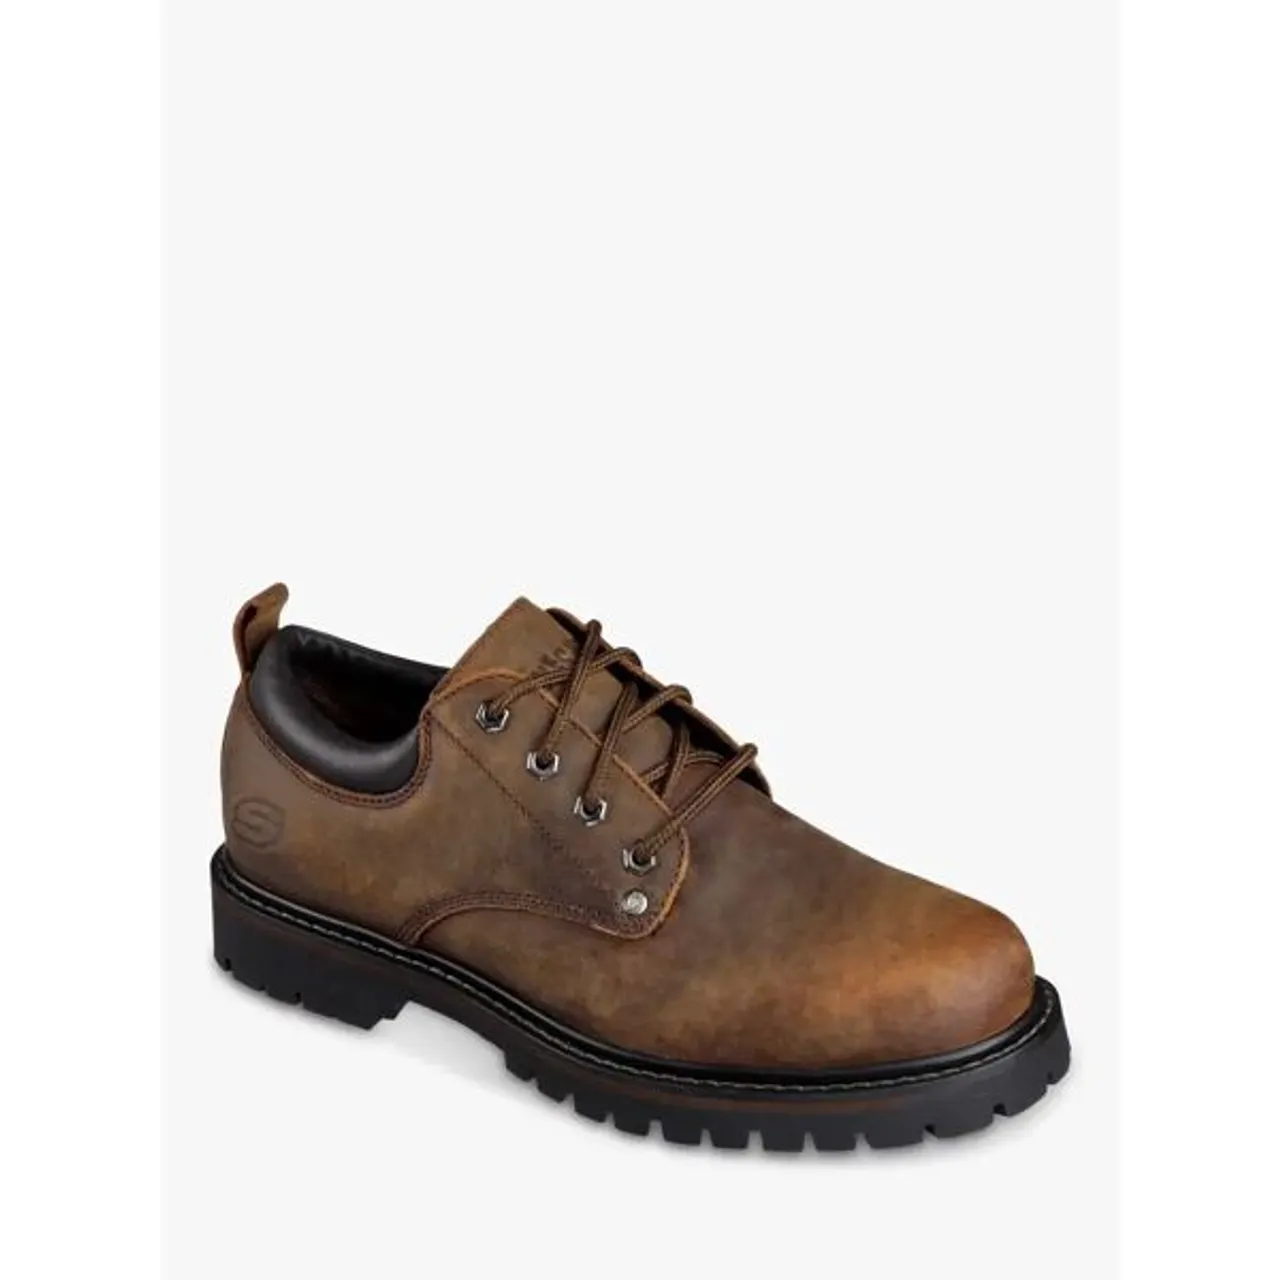 Skechers Leather Tom Cats Lace Up Oxford Shoes, Dark Brown - Dark Brown - Male